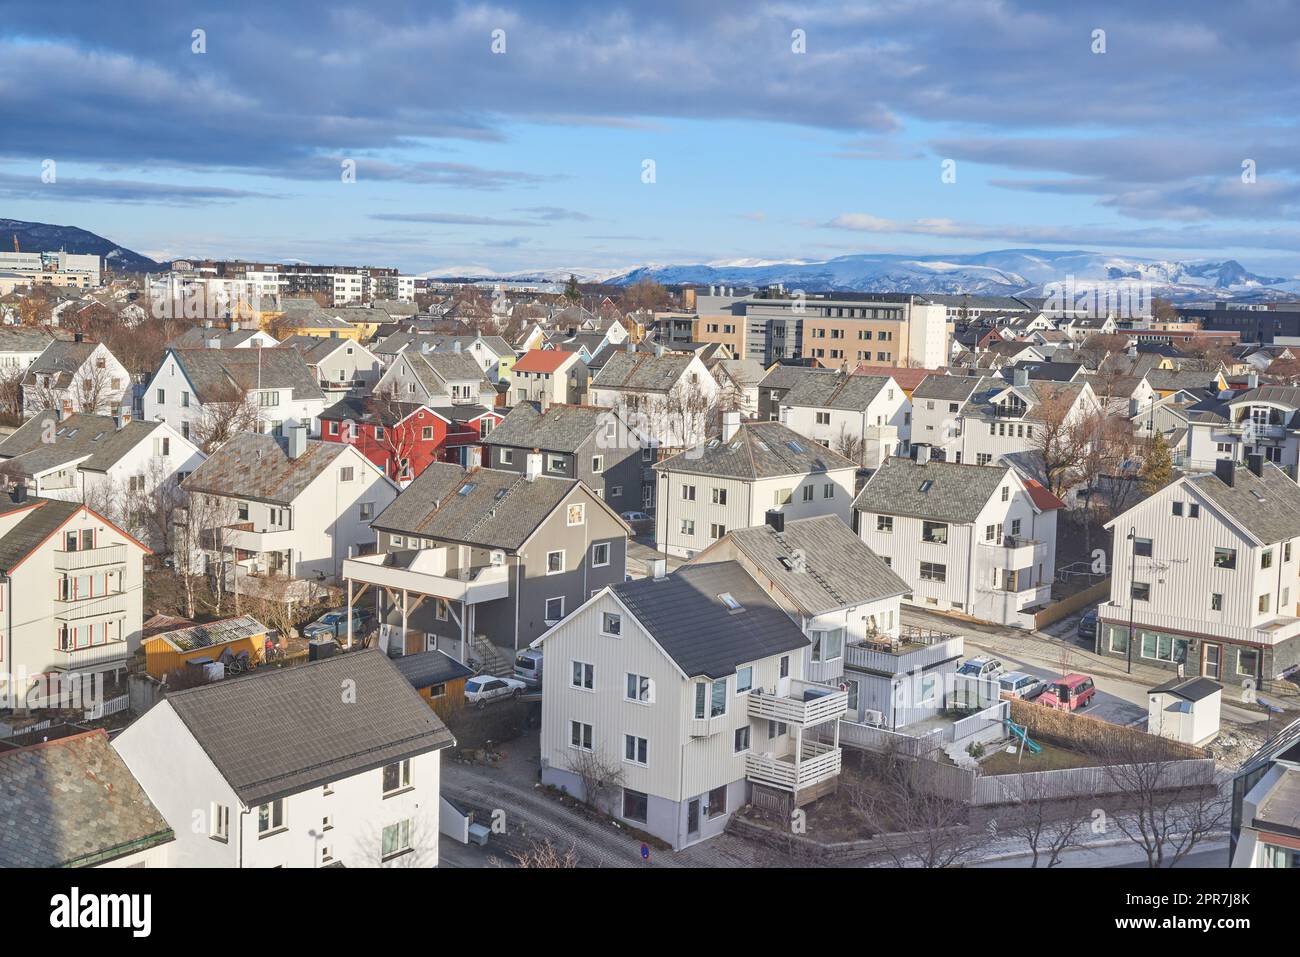 The small city of Bodo in Norway with a cloudy or overcast blue sky. A beautiful scenic view of urban landscape streets and buildings with copy space. Peaceful rural town from above Stock Photo